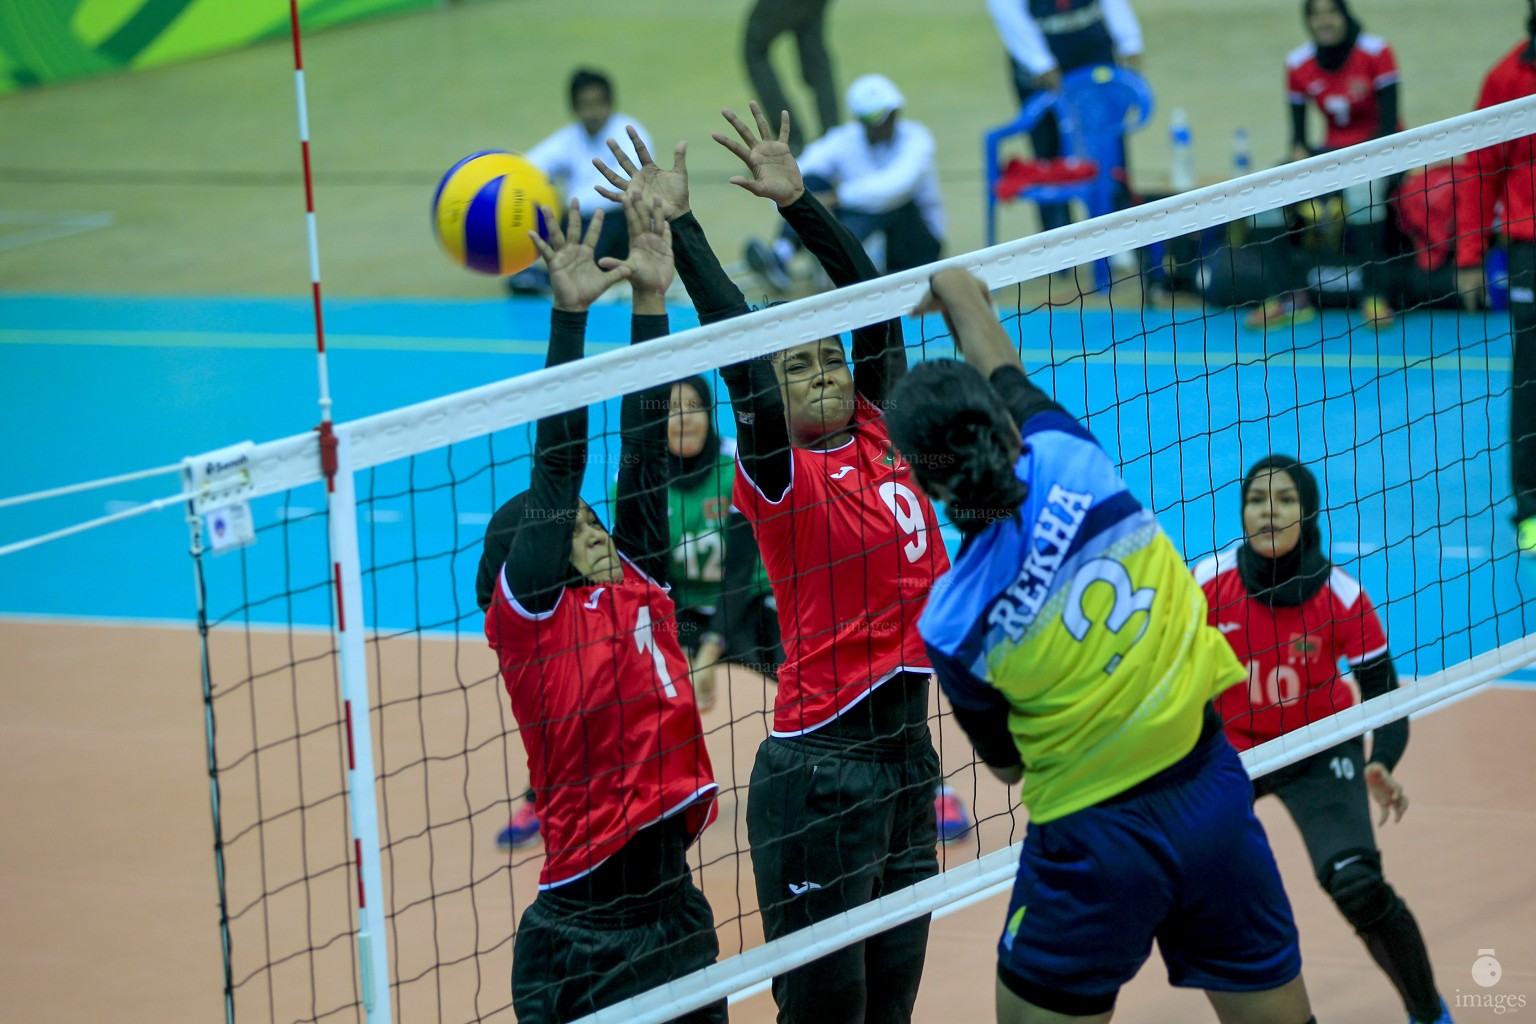 Maldives vs India in the volleyball women event of the South Asian Games in Guwahati, India, Friday, February 5, 2016. (Images.mv Photo: Mohamed Ahsan)